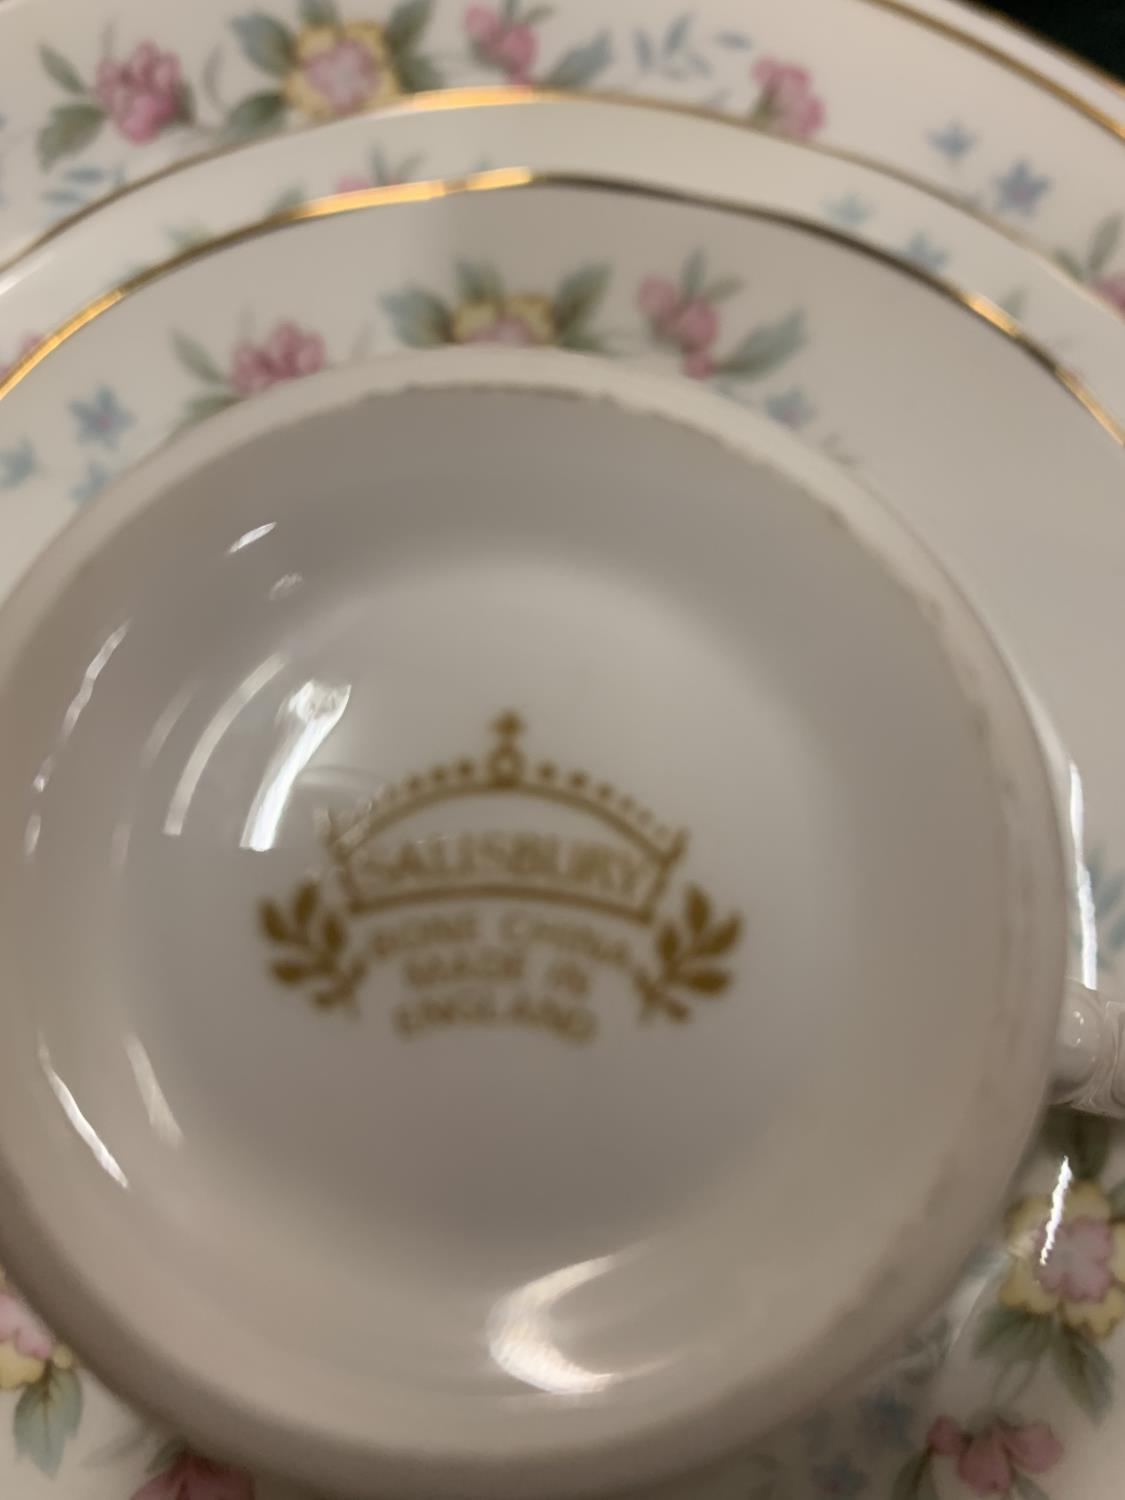 A SALISBURY DINNER SET WITH FLORAL DESIGN - Image 2 of 3